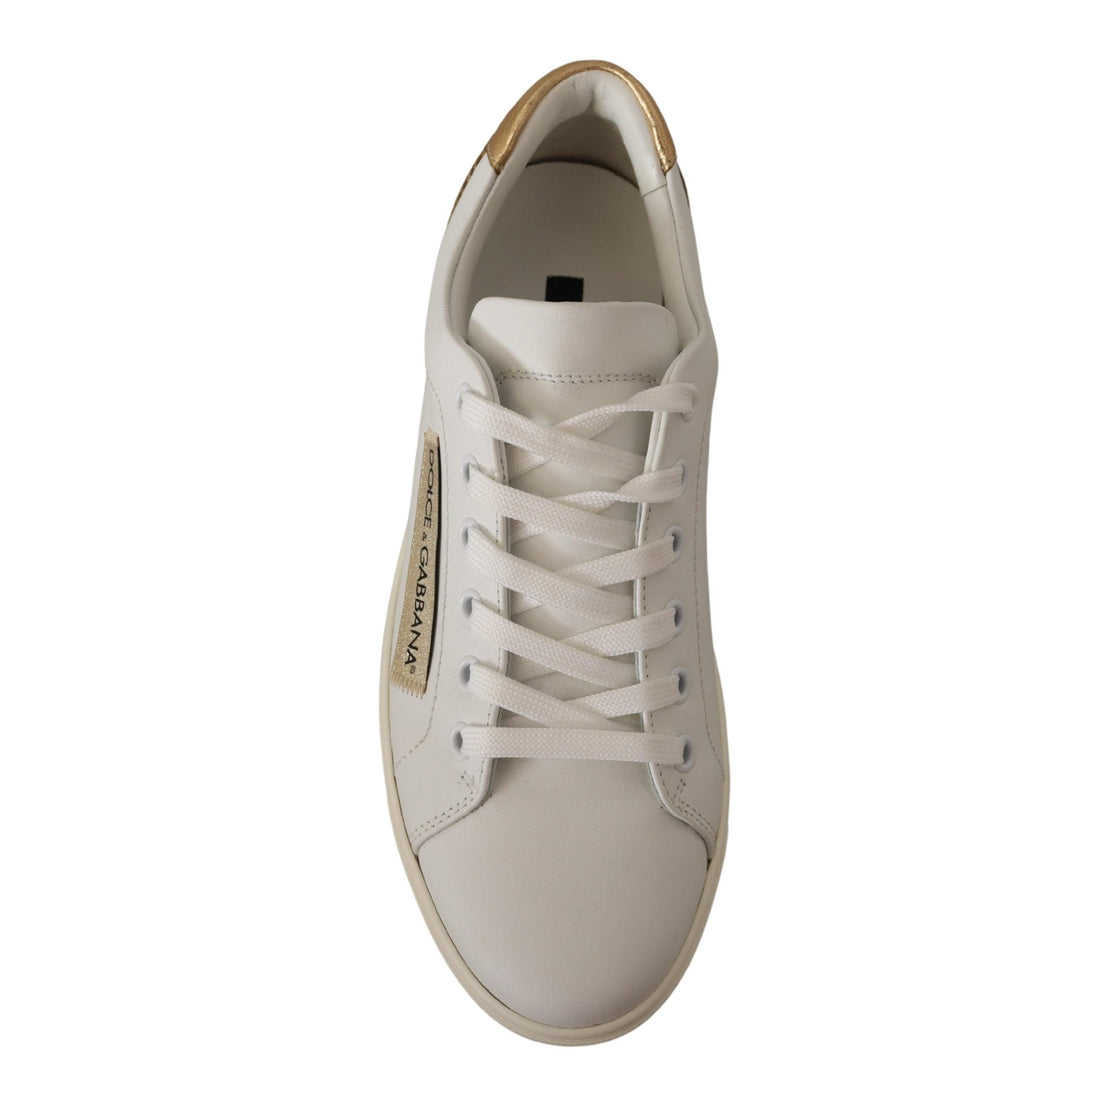 Dolce & Gabbana Elegant White Leather Sneakers with Gold Accents